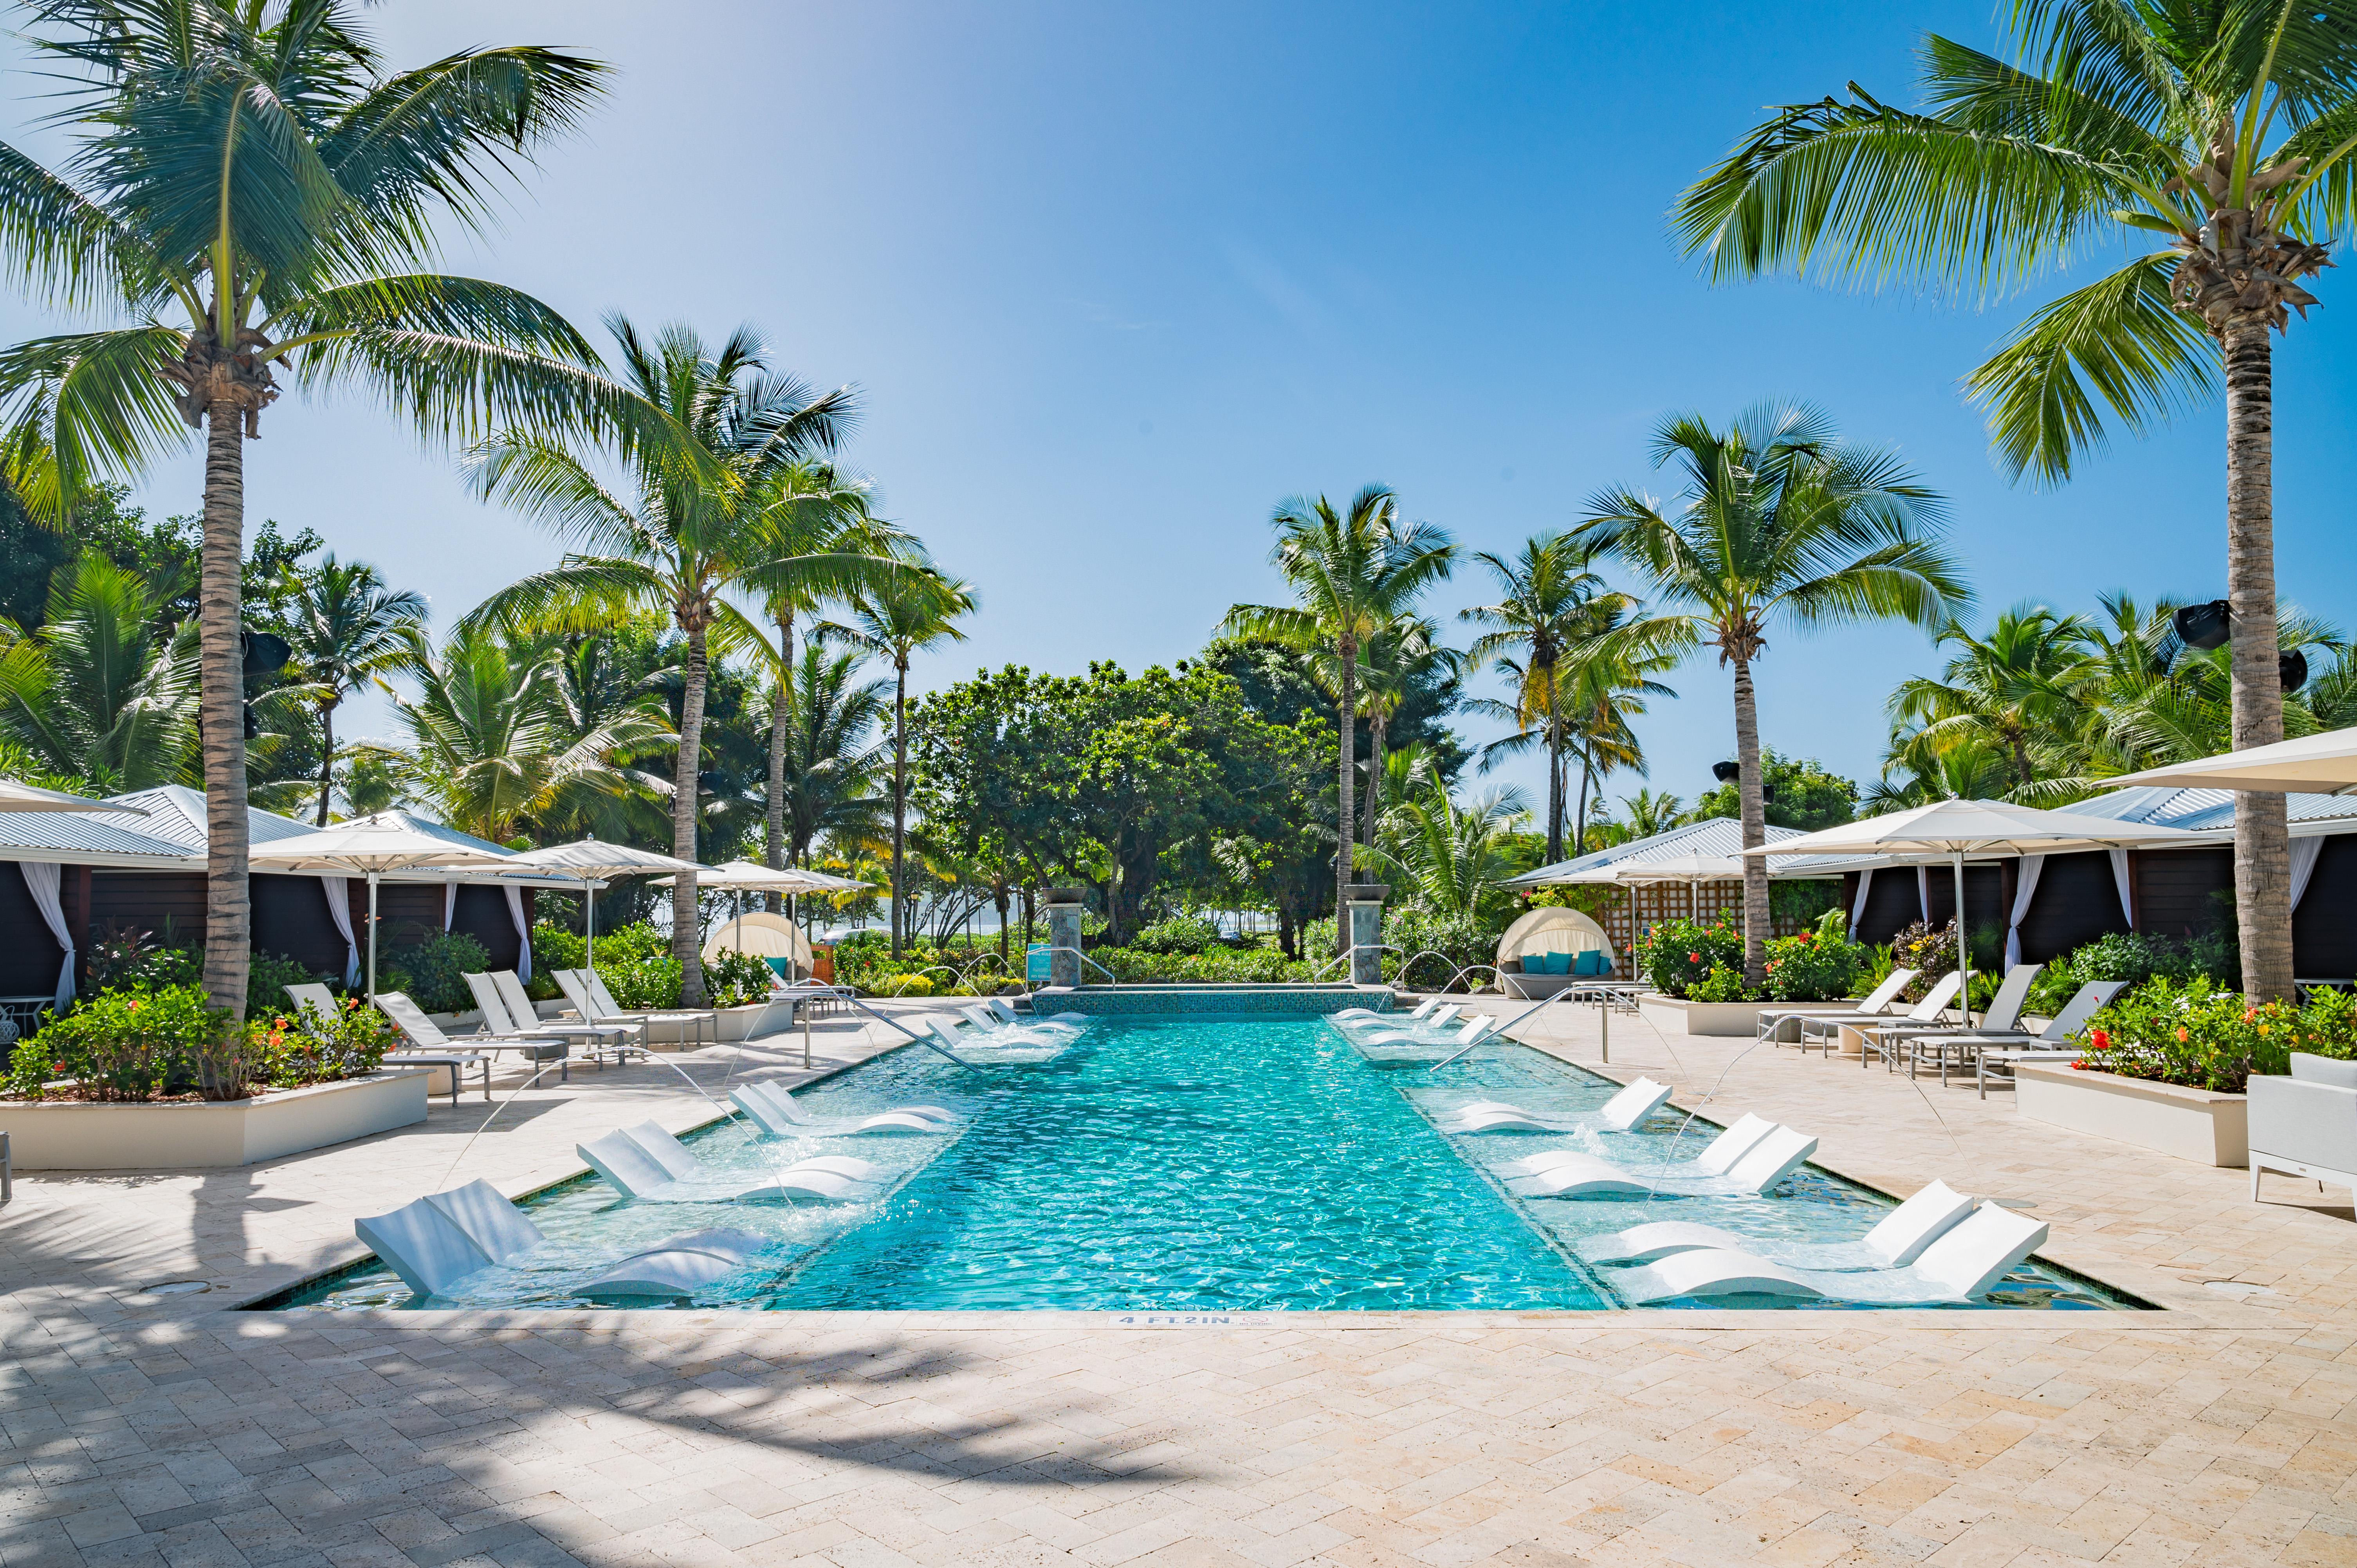 The Greathouse pool is magnificently designed and sparkles at the center of the property. Lounging around the in-pool loungers or private poolside cabanas is heavenly.